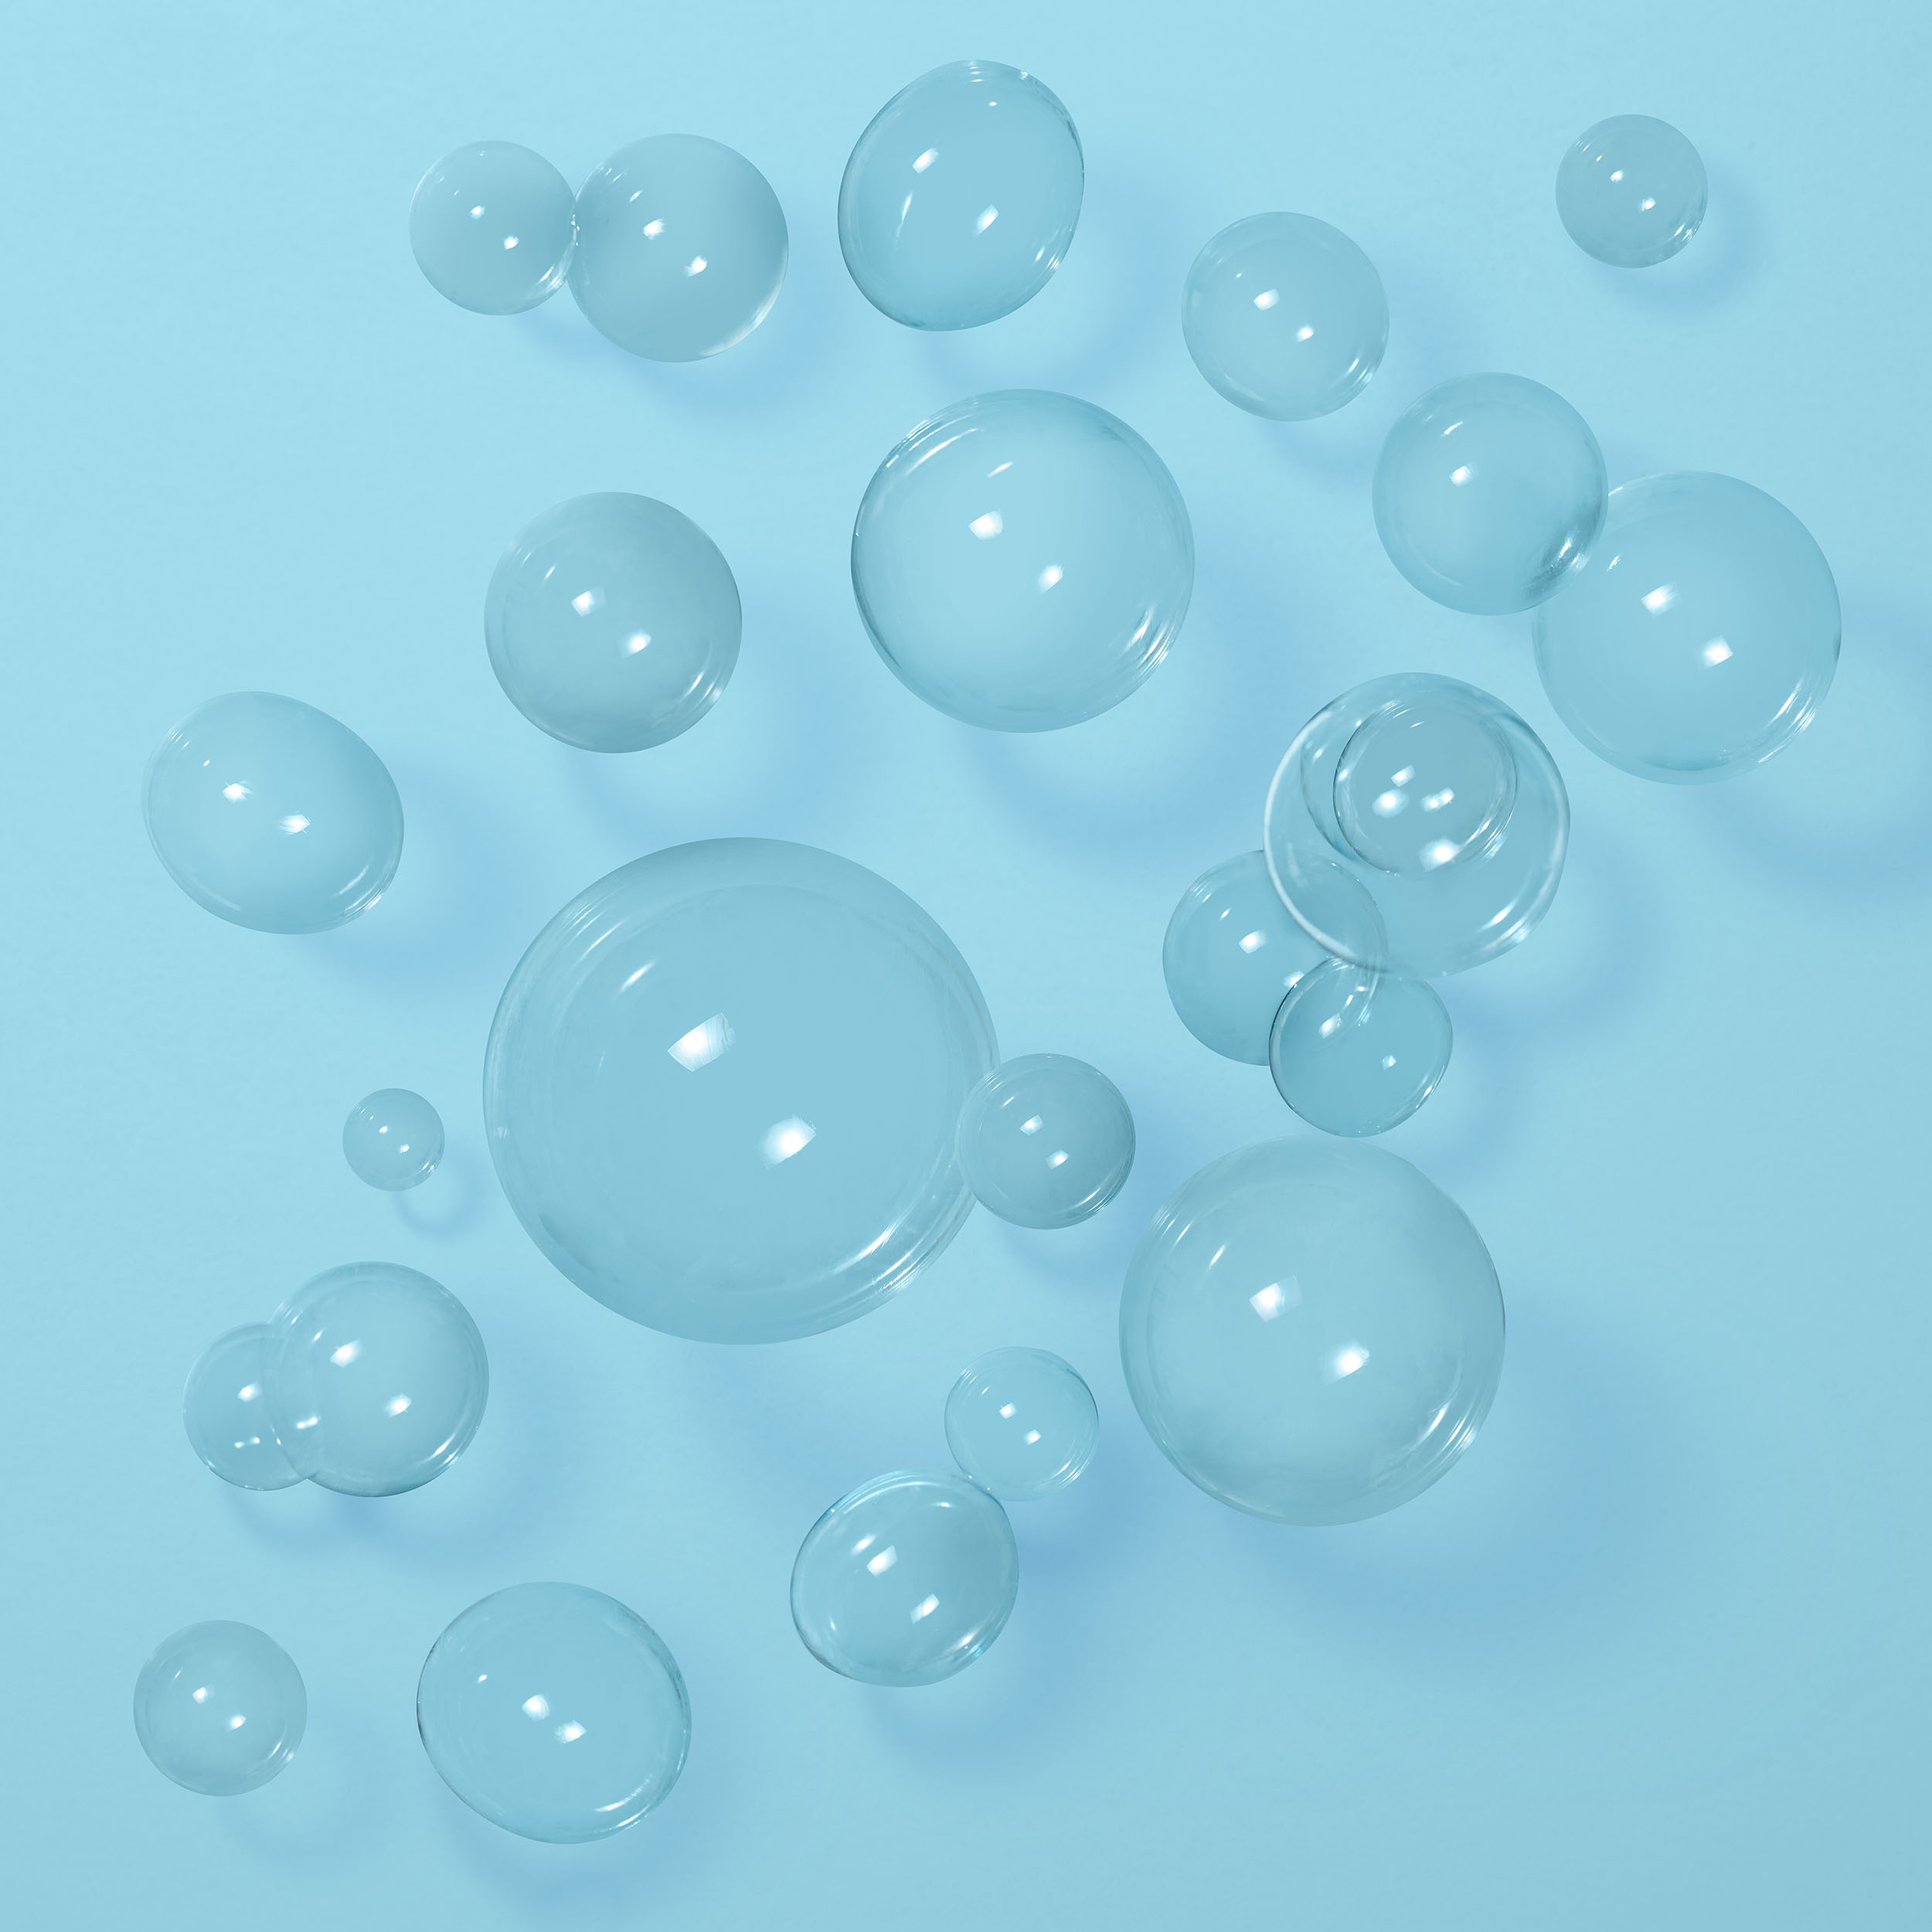 abreakey_productphotography_grove_bubbles